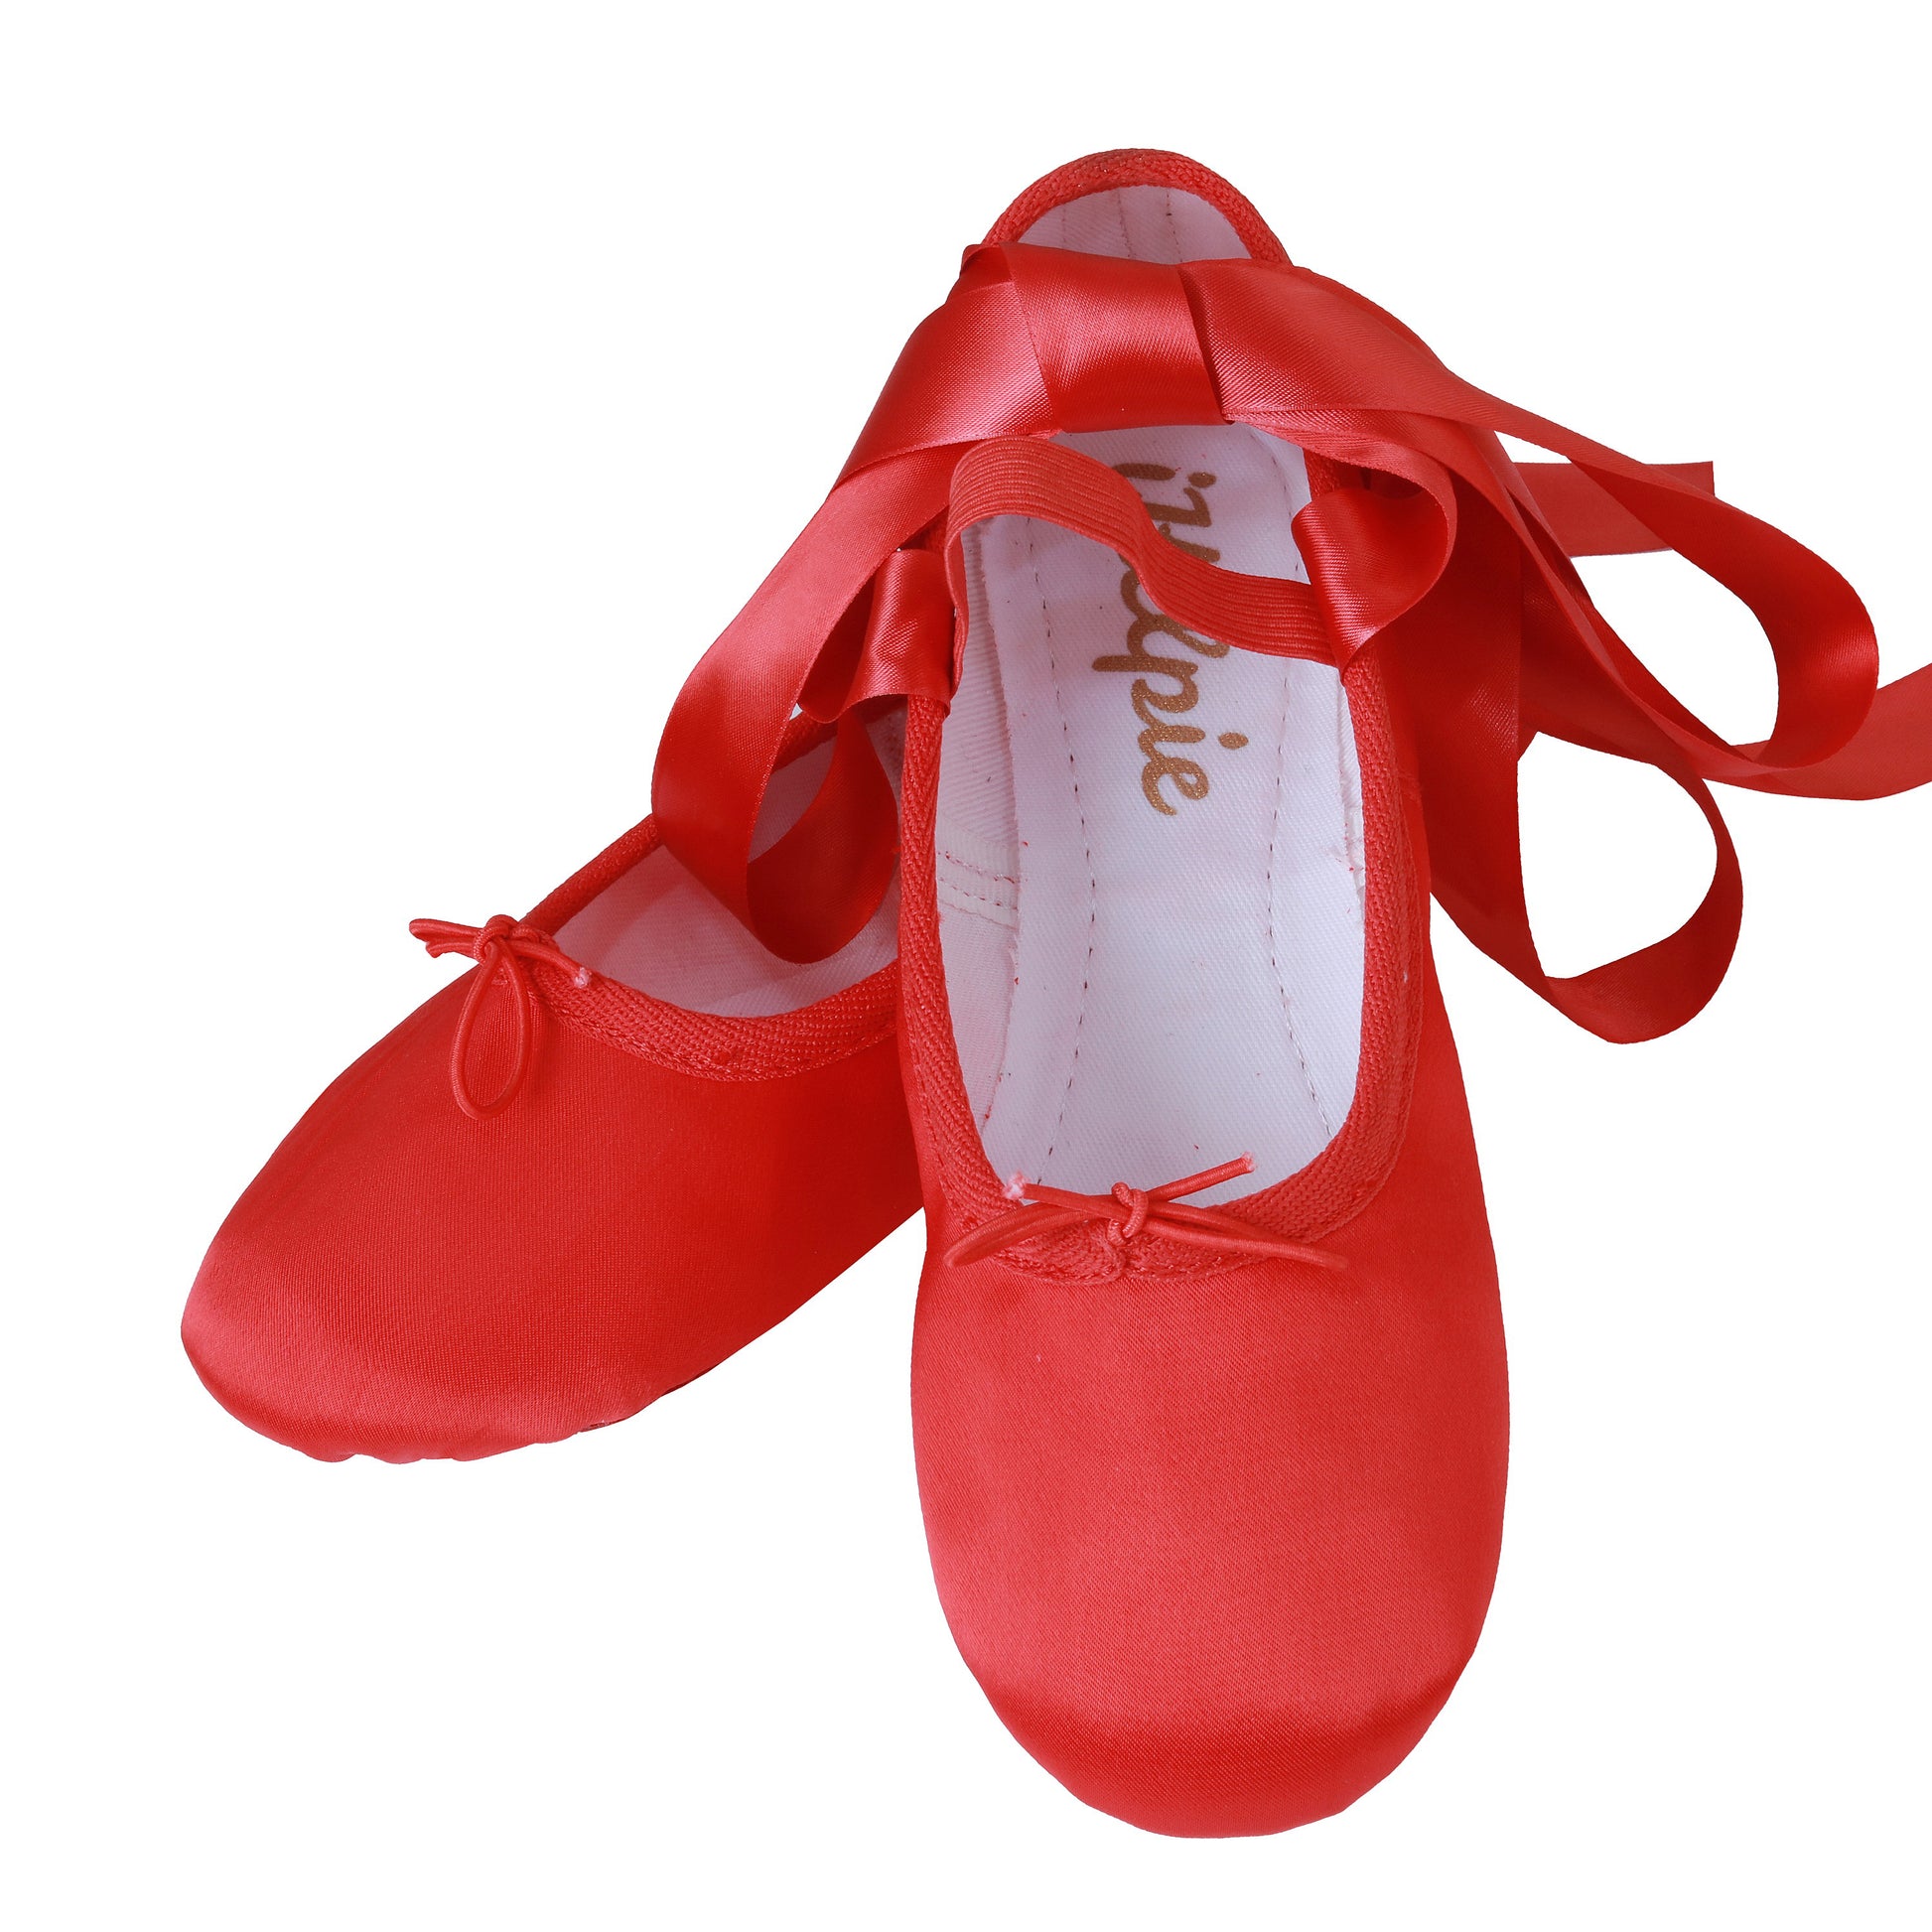 Red Satin Ballet Dance Shoes Adult Child Kids Dancing Shoes Full – iKelpie